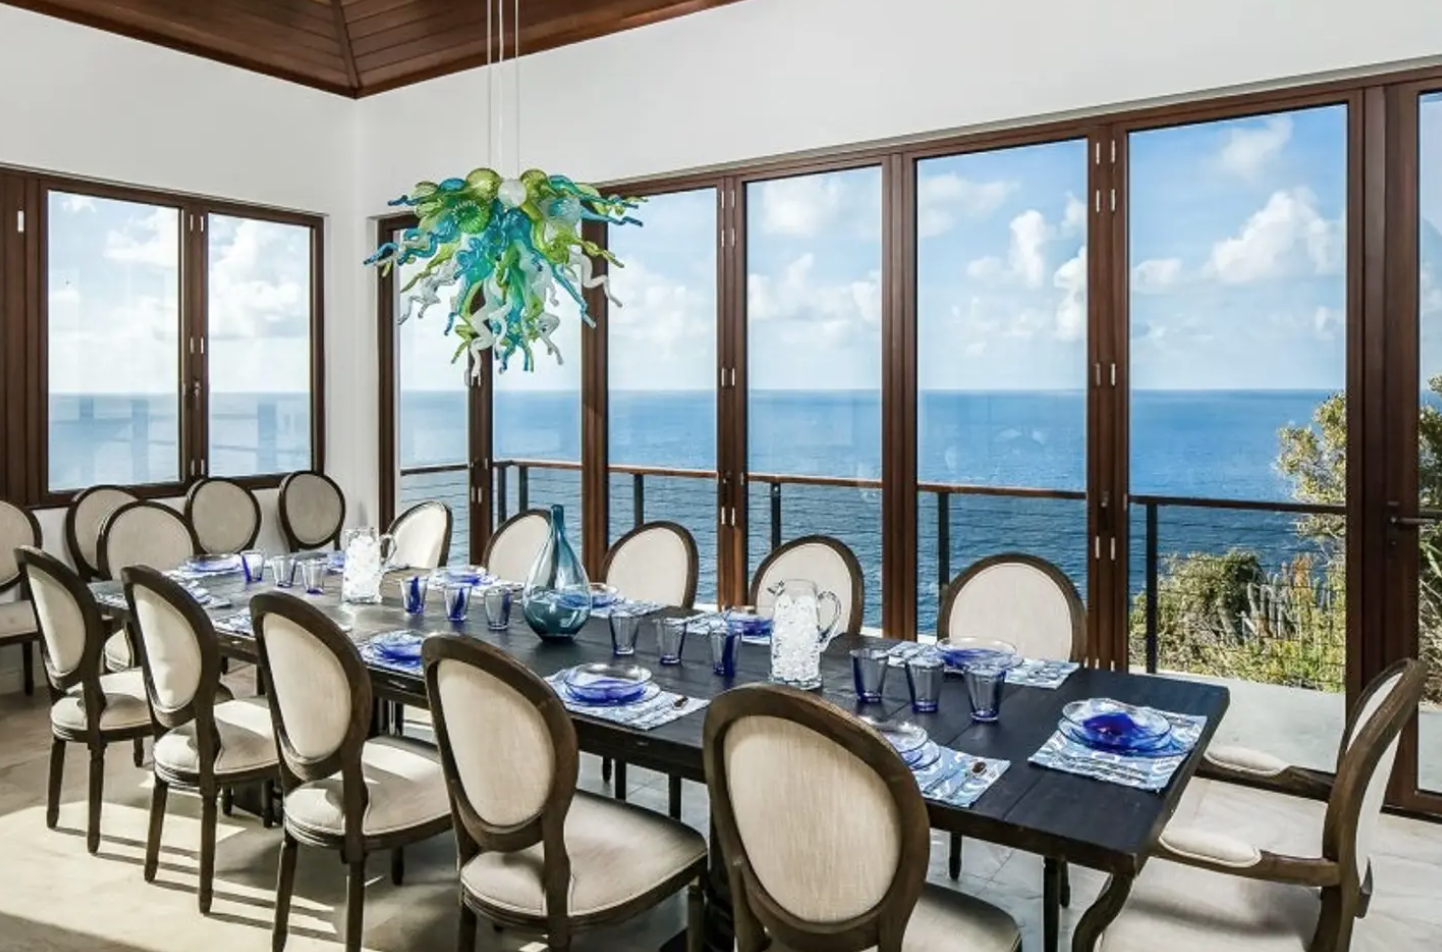 Large Dining Room of "Finisterre" - a two-acre, three-building complex on St. John